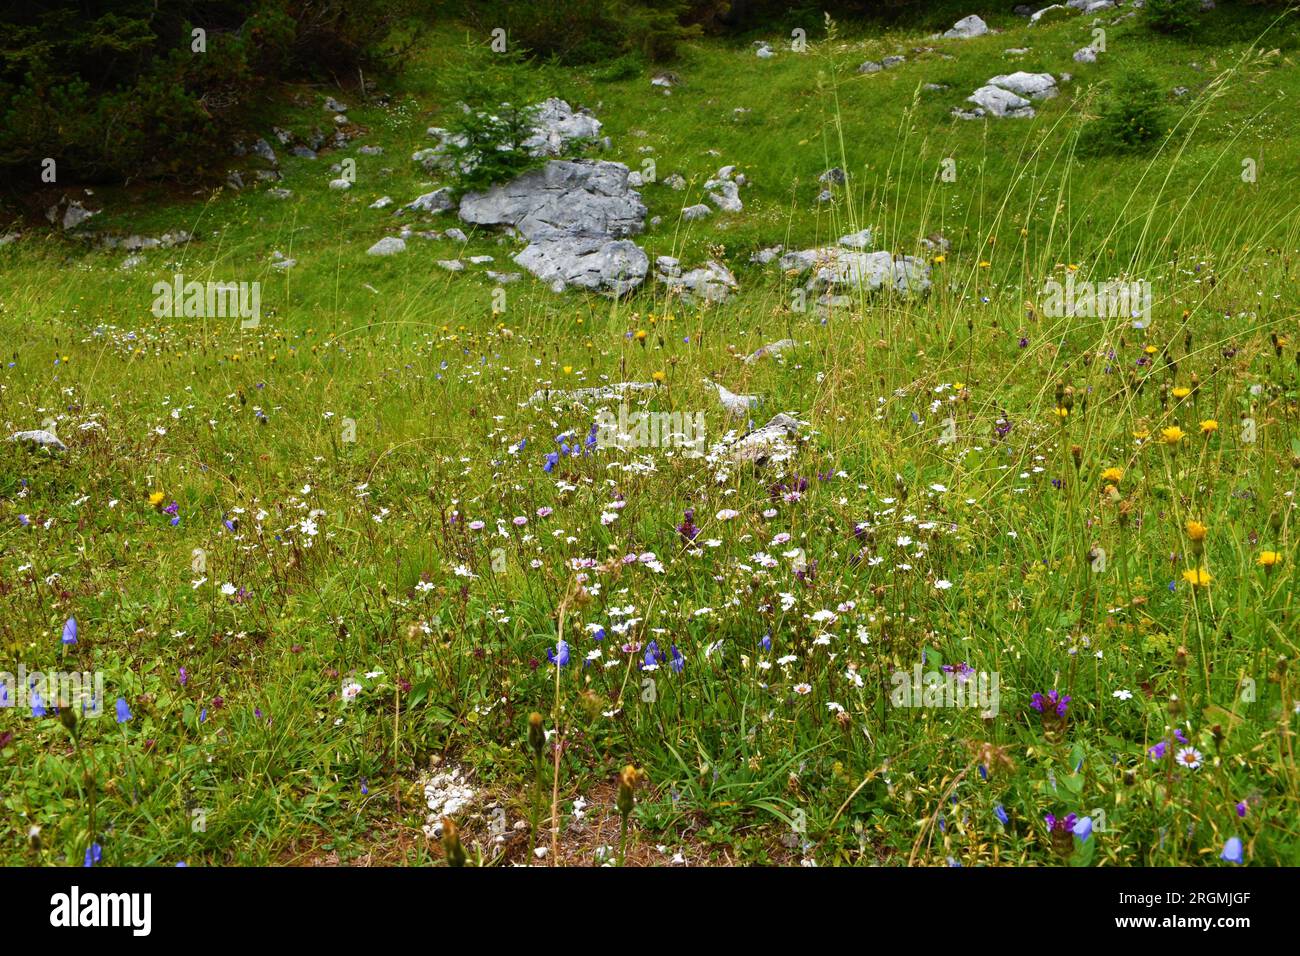 Meadow with white Silene alpestris and blue earleaf bellflower (Campanula cochleariifolia) flowers in Julian alps and Triglav national park, Slovenia Stock Photo